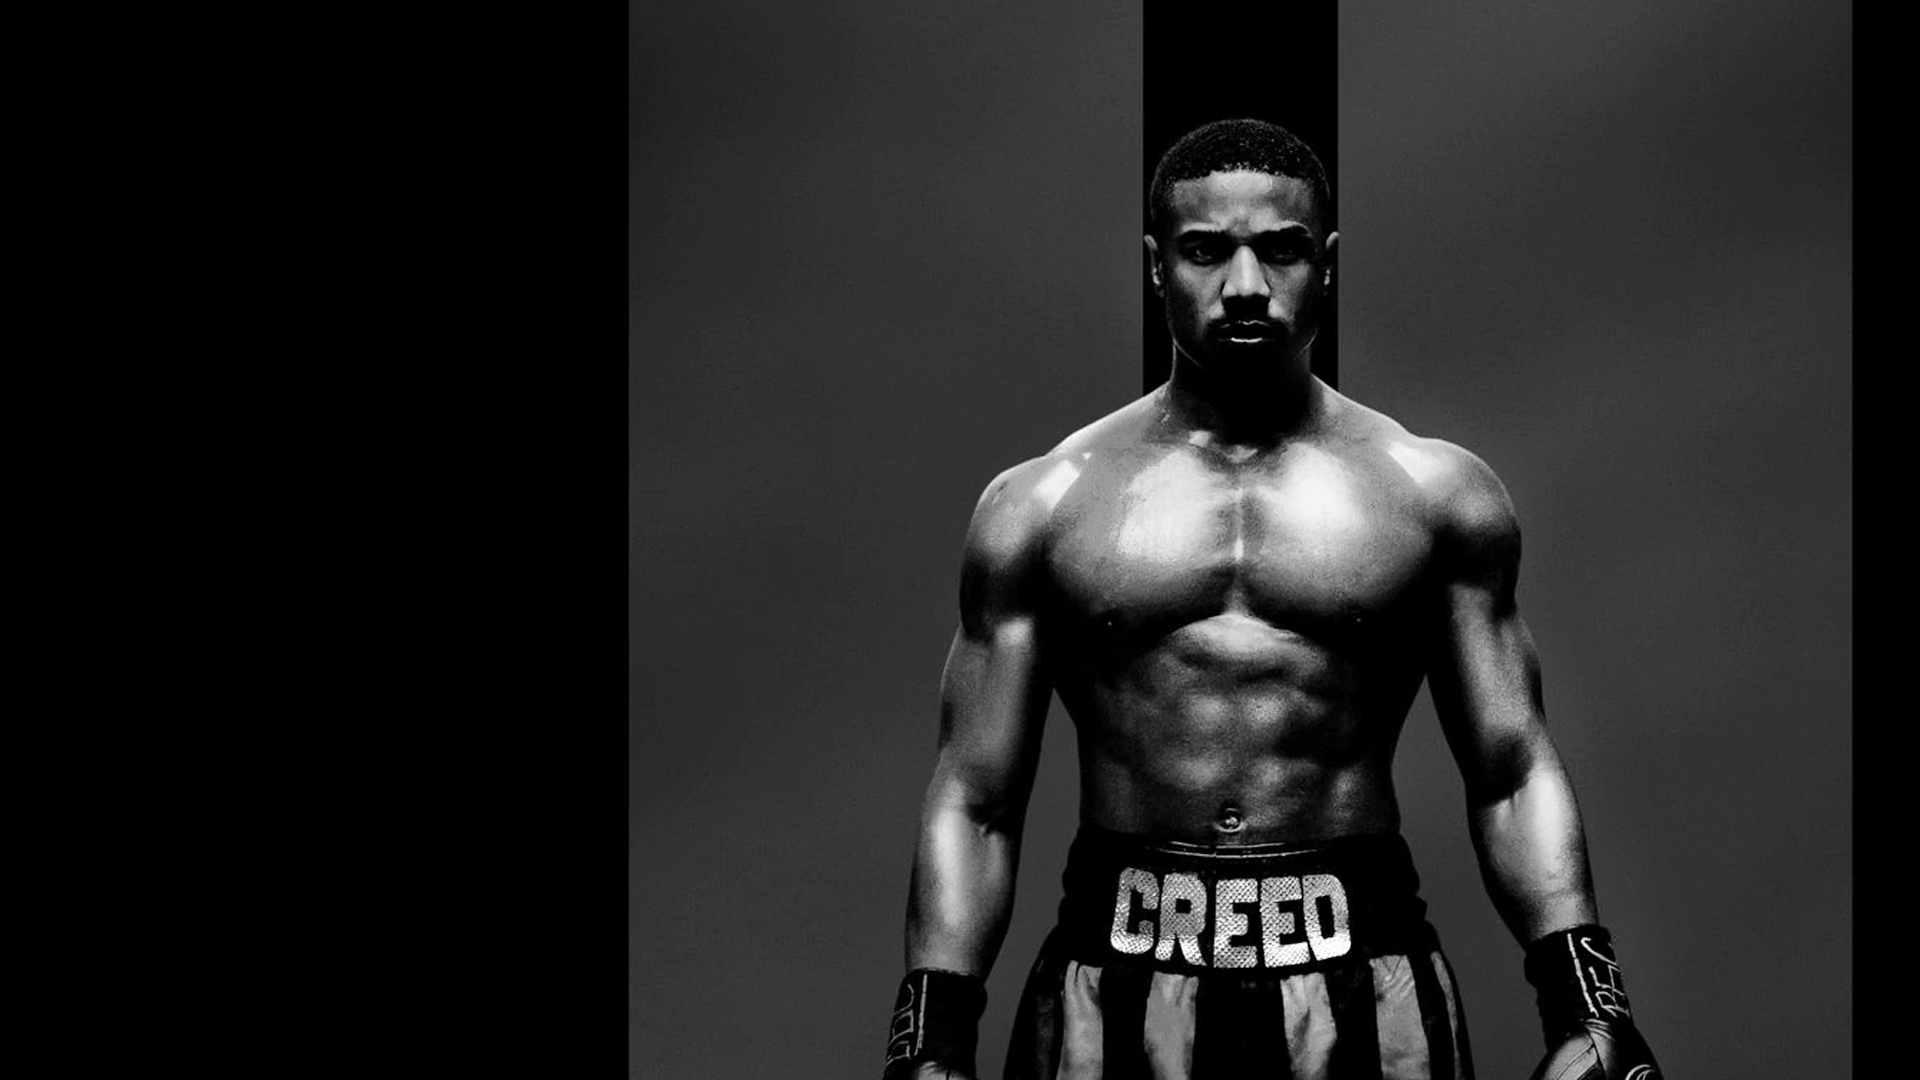 creed 2 ending explained spoiler talk review by deffinition on the new rocky film starring michael b jordan and sylvestor stallone intro